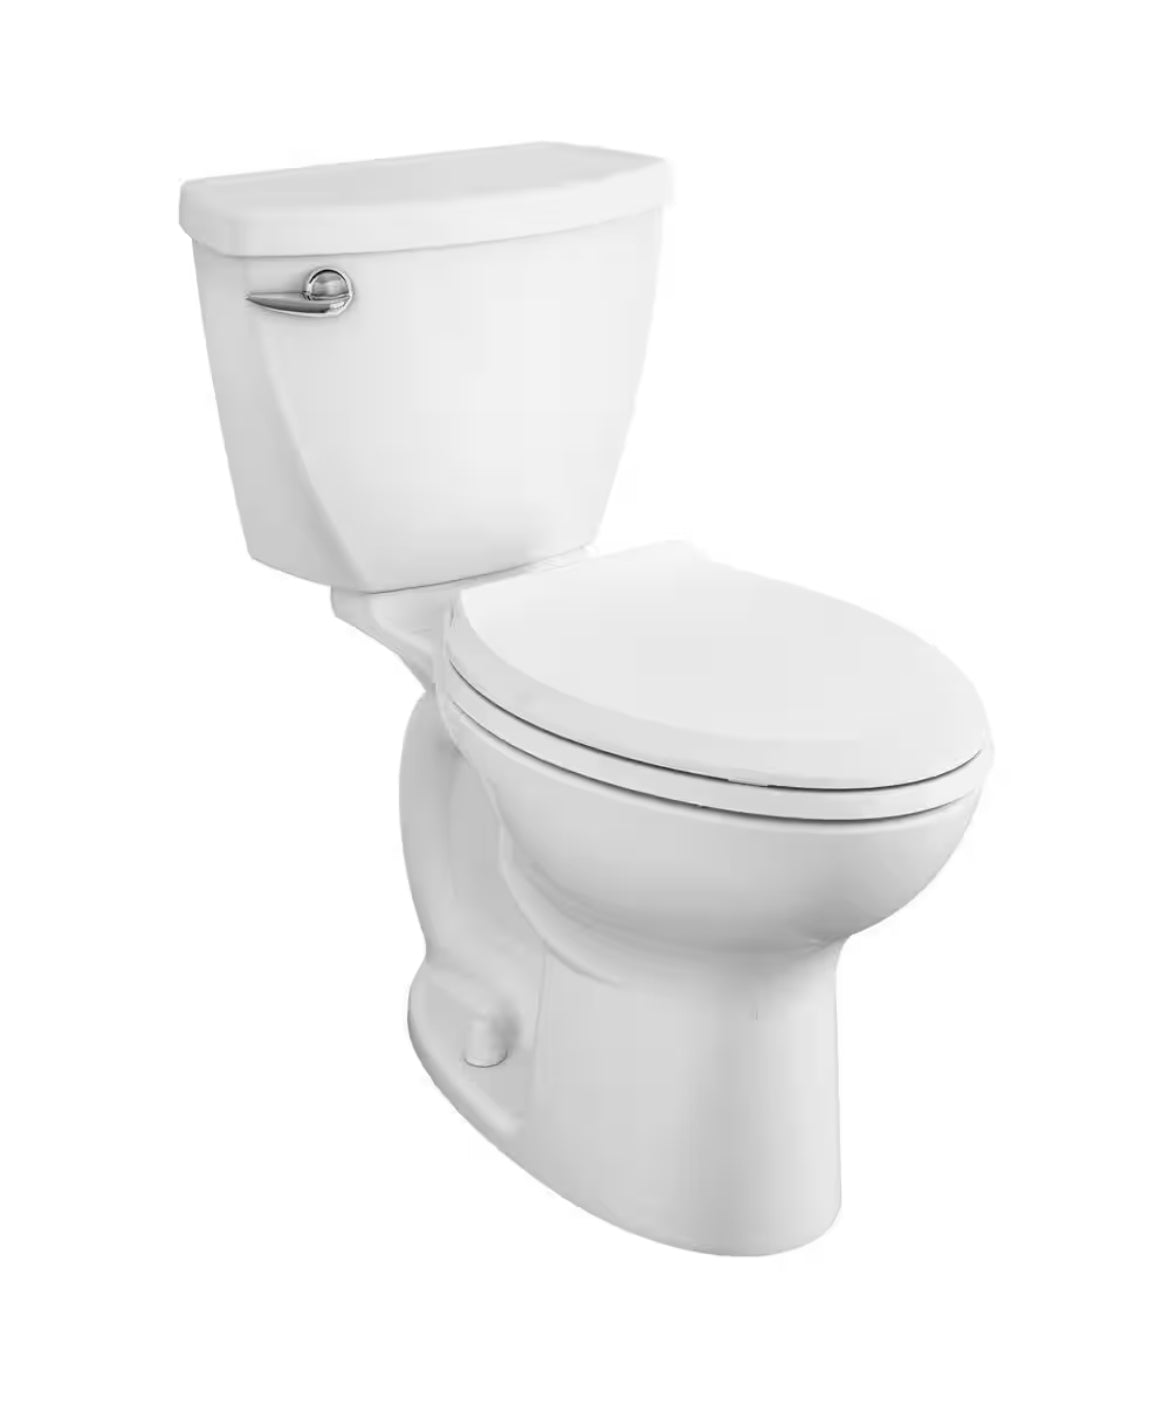 Cadet 3 FloWise Two-Piece 1.28 GPF Single Flush Elongated Chair Height Toilet with Slow-Close Seat in White